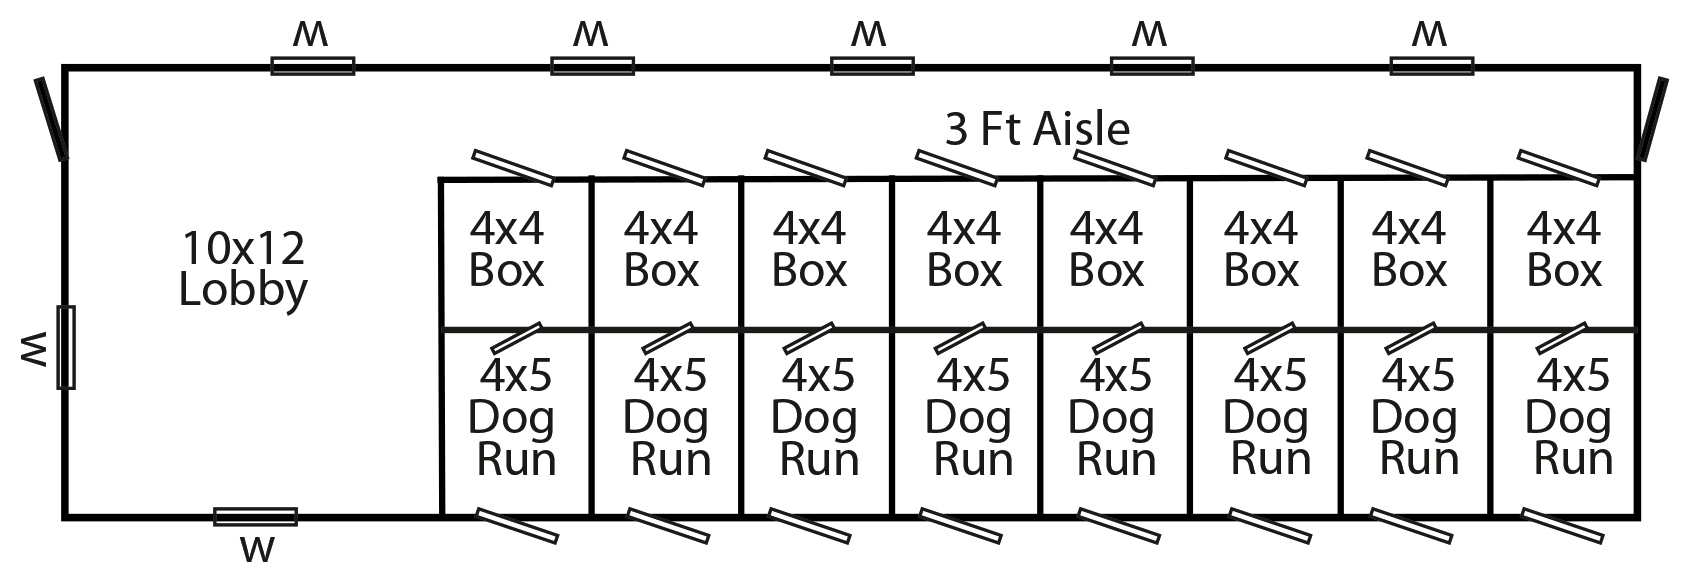 Floorplan of a 12x42 commercial kennel with 8 dog runs.